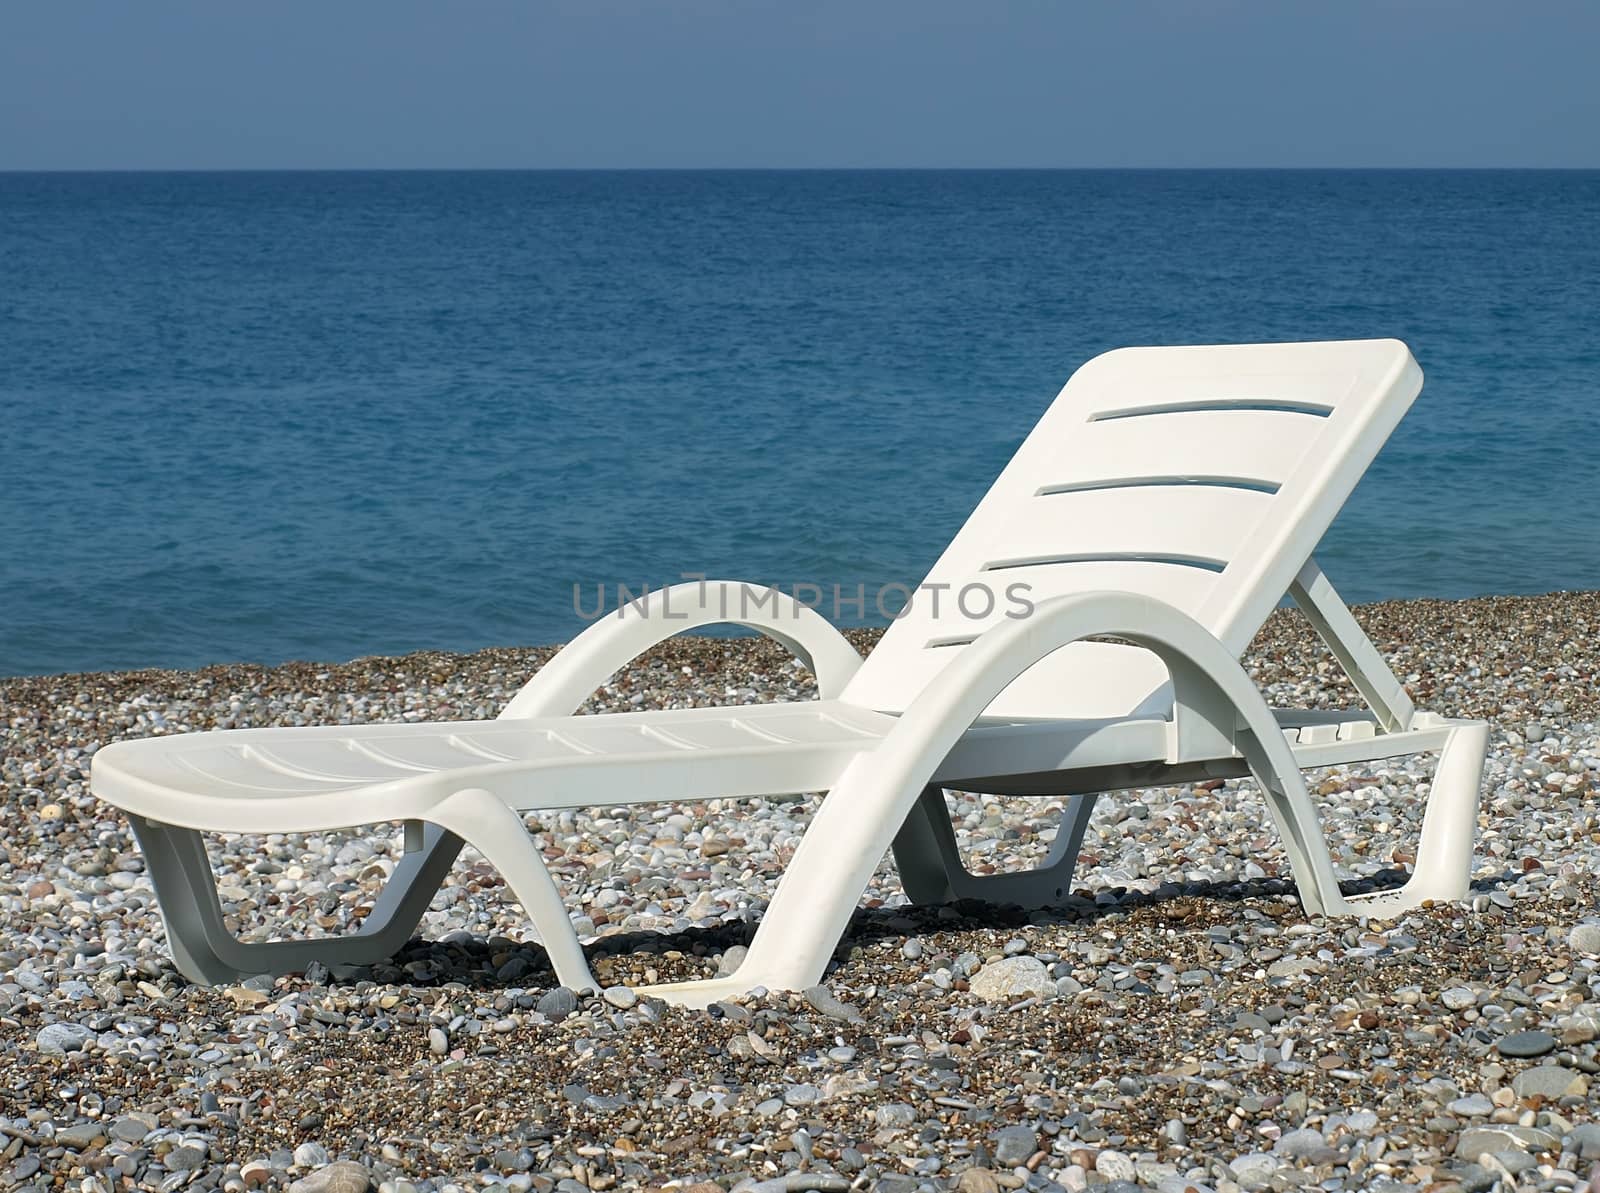 Chaise lounge on the beach